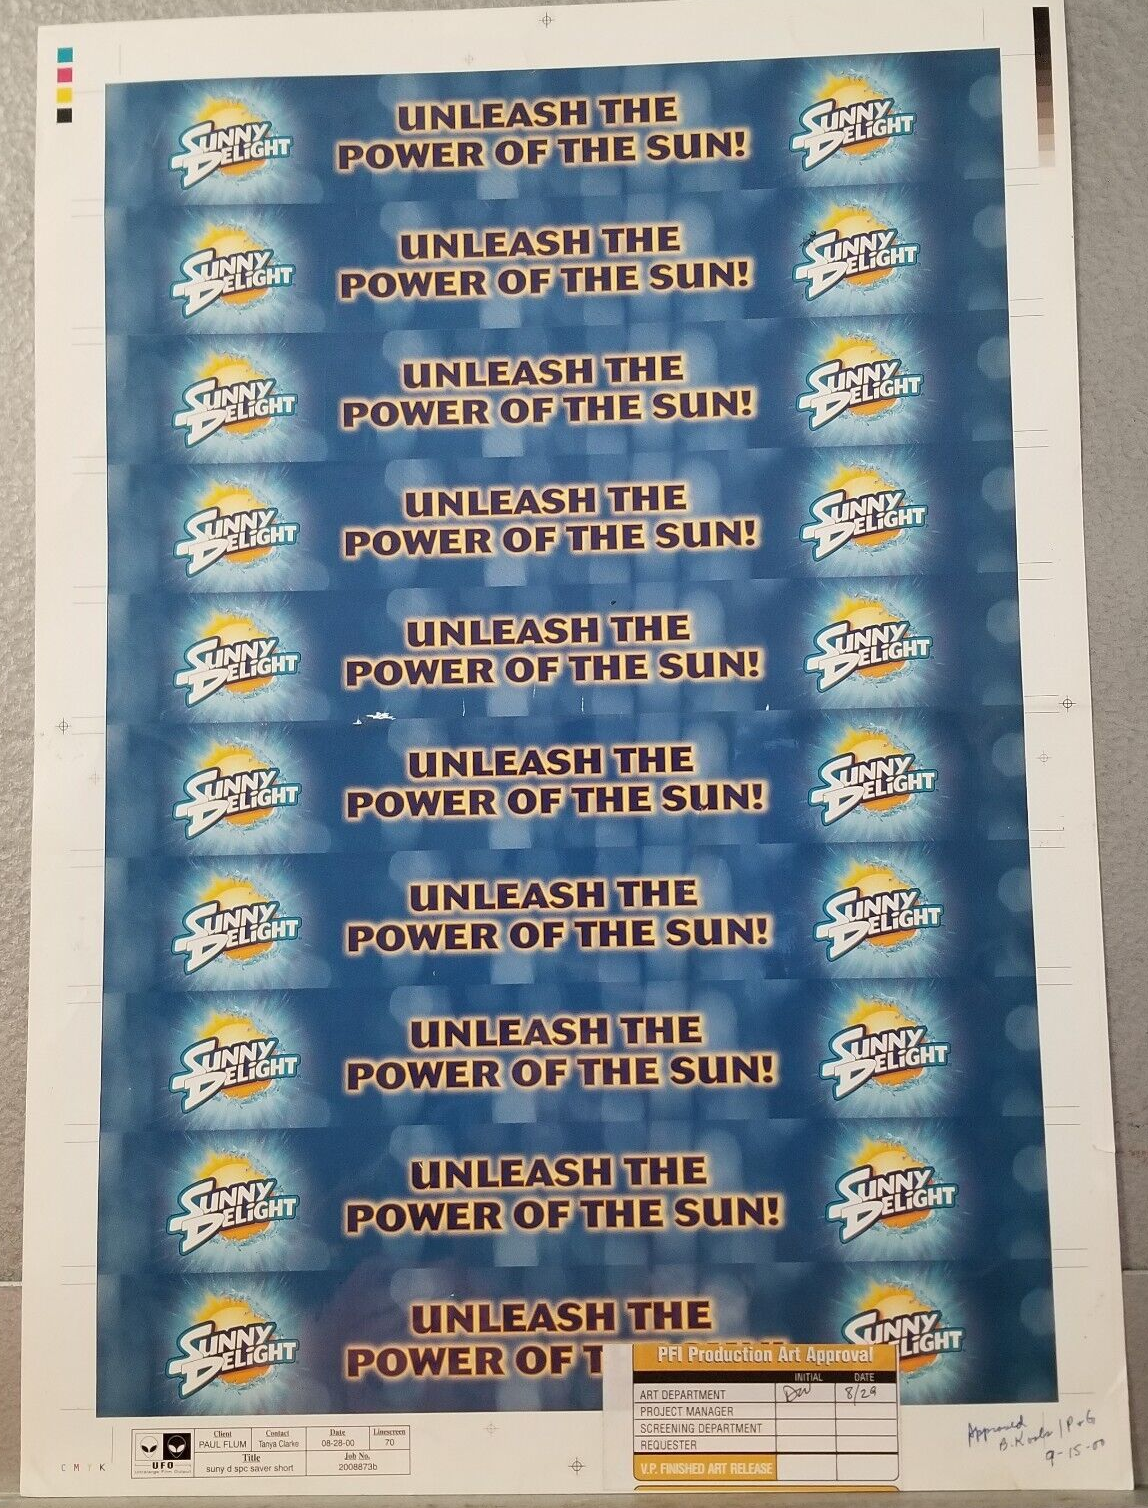 Primary image for Sunny Delight Preproduction Advertising Art Work Unleash Power of Sun 2000